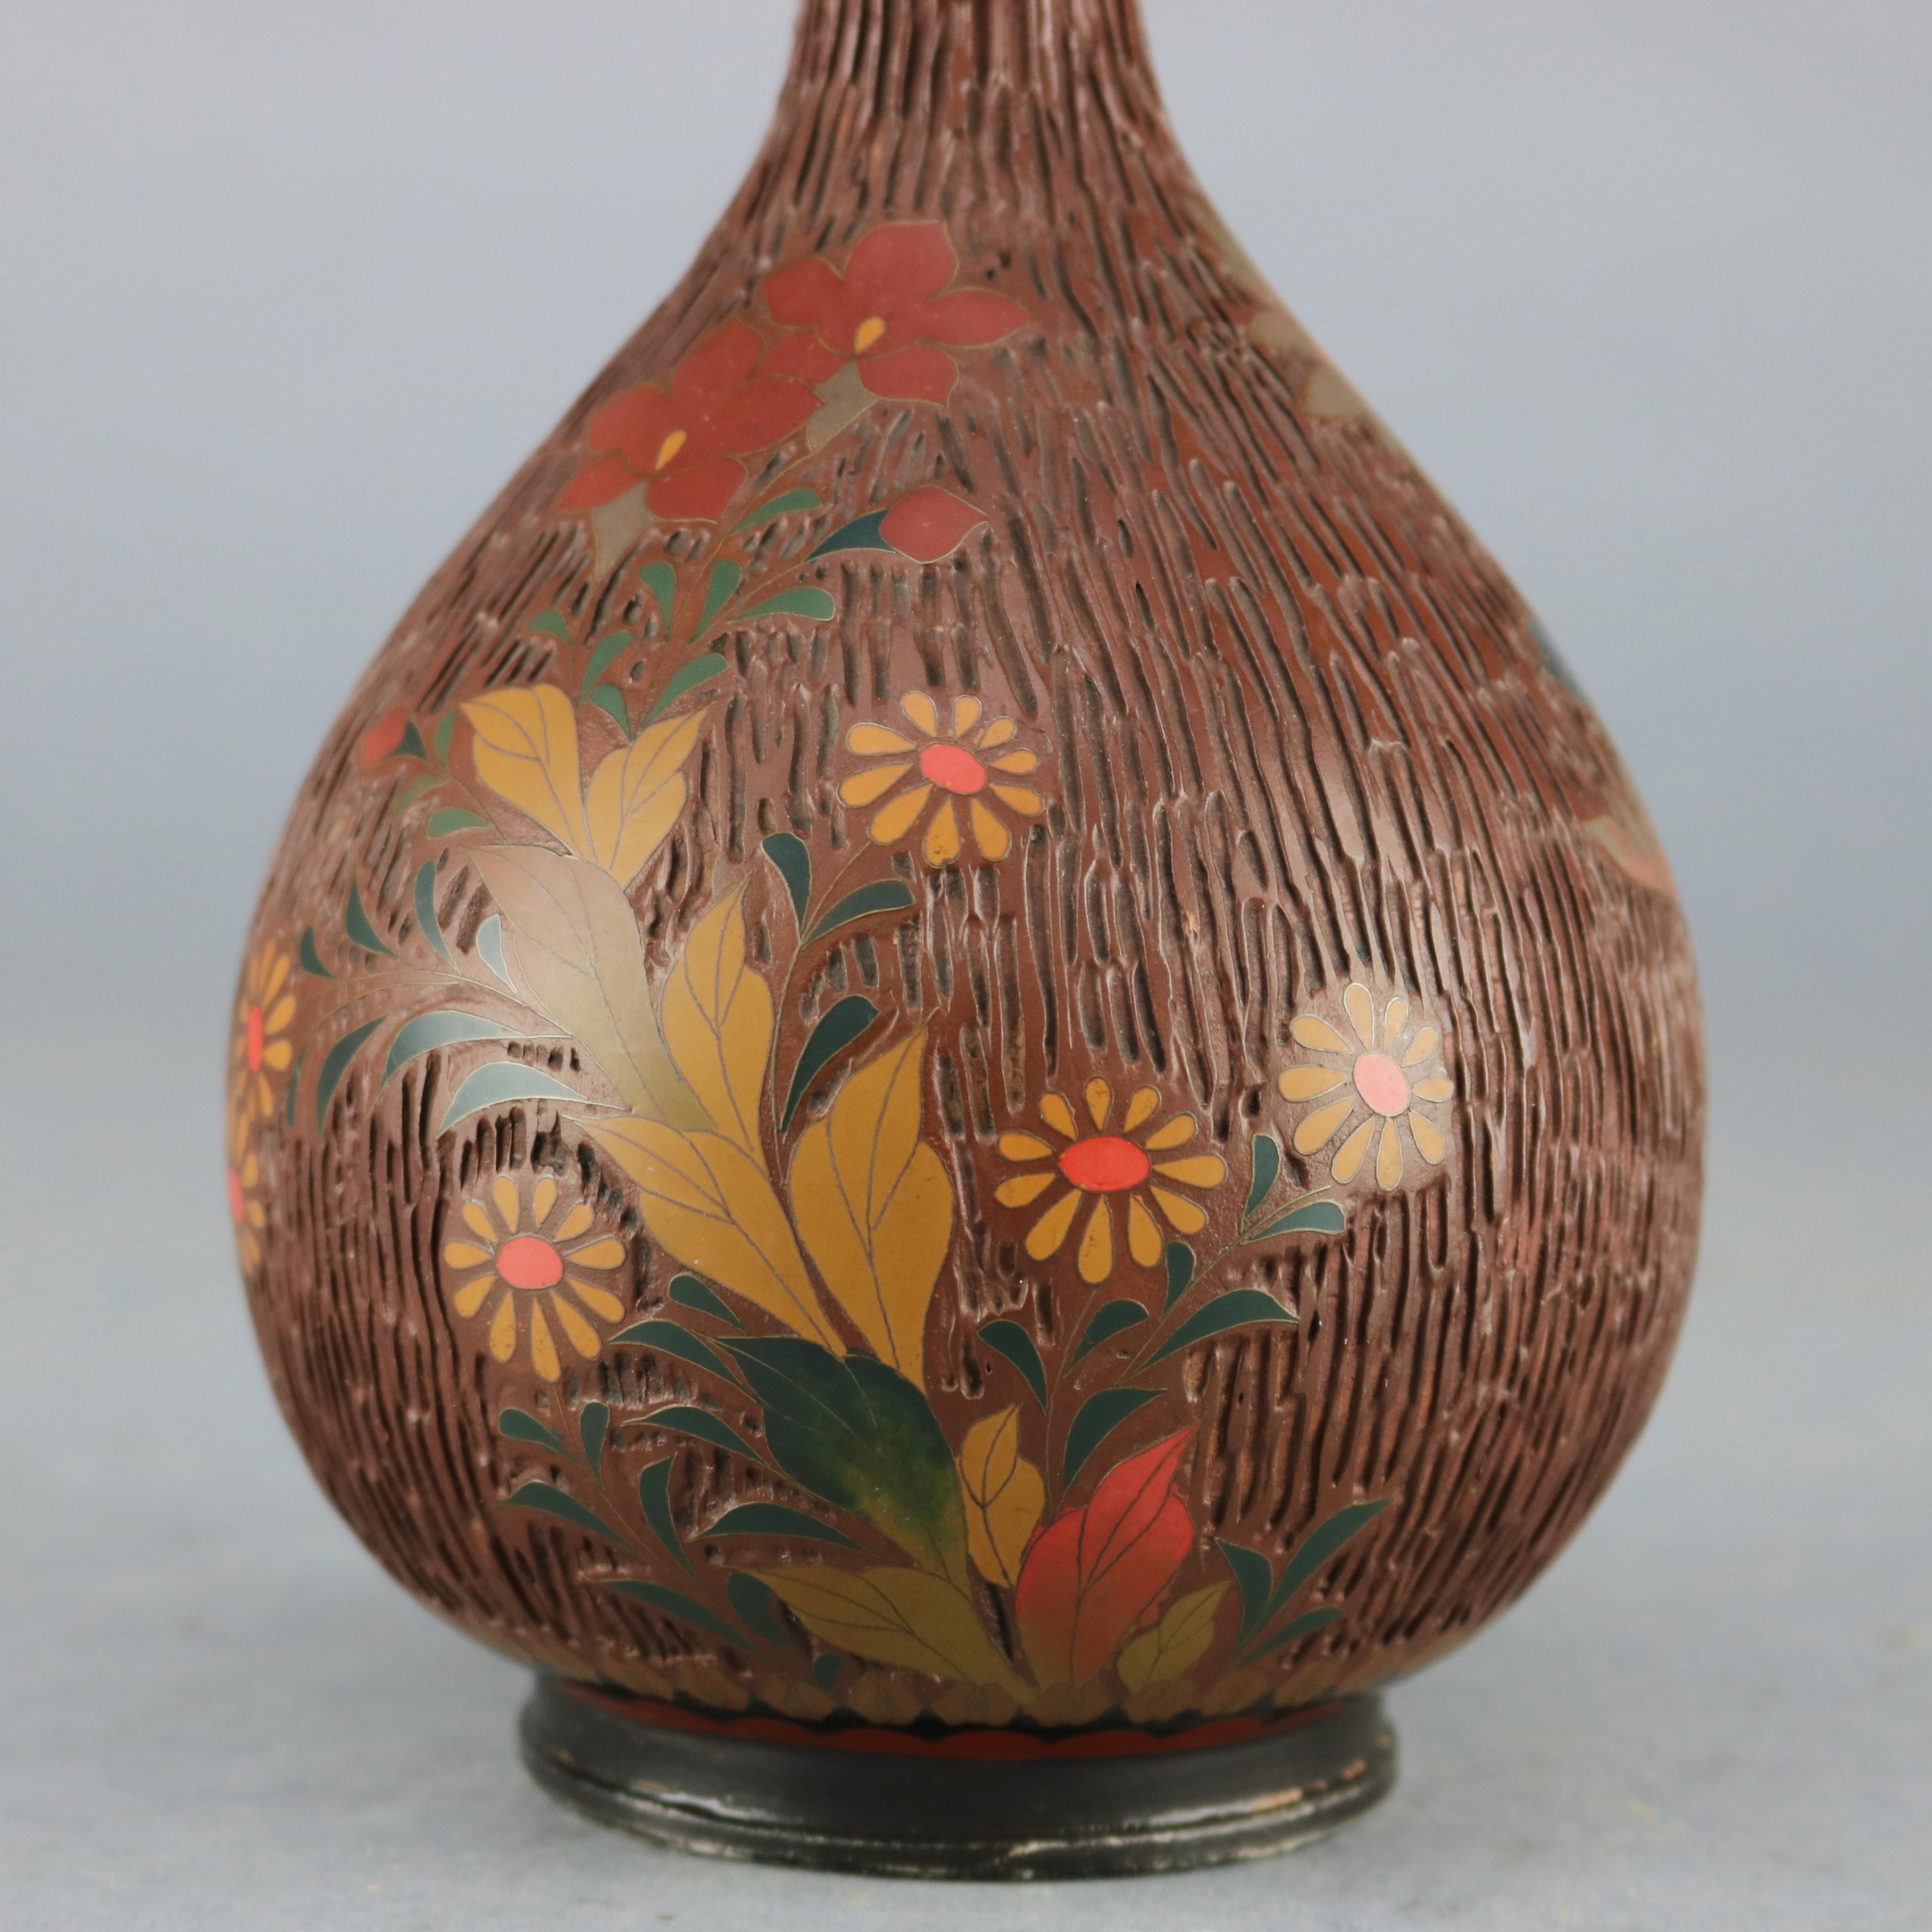 An antique Chinese Cloisonne bud vase offers enameled metal construction all-over textured wood bark design with decorated collar, elements of the Naturalist Movement, circa 1990. 

Measures: 11.75